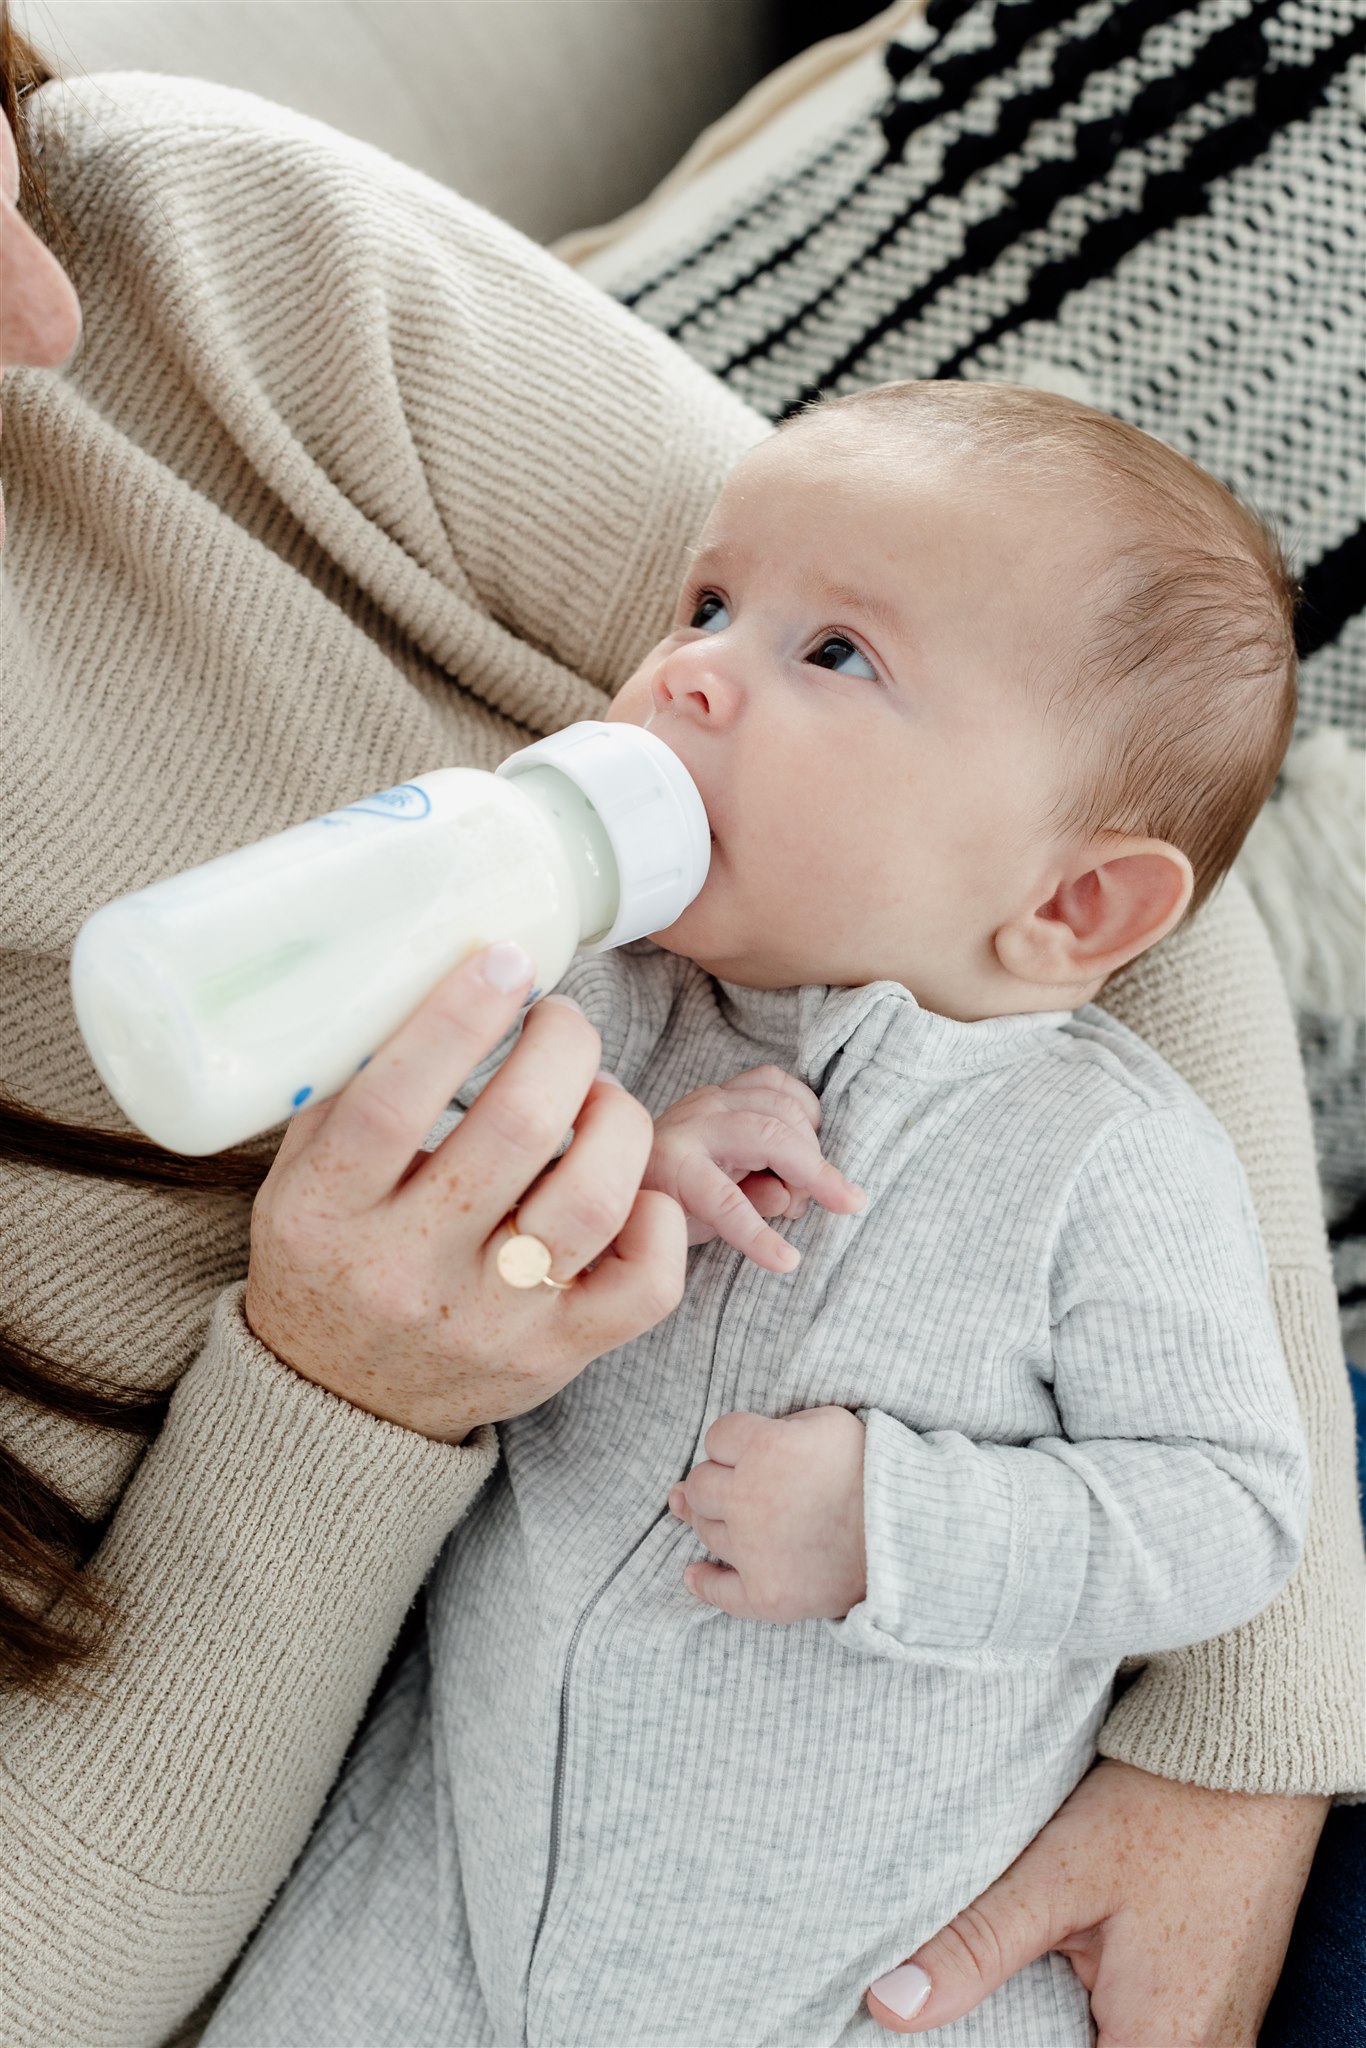 Did you know that by 13 months old there should be NO bottles in your baby’s life?! I’m going to walk through the 2 ways to transition off the bottle and why this may be causing problems in your baby’s sleep.